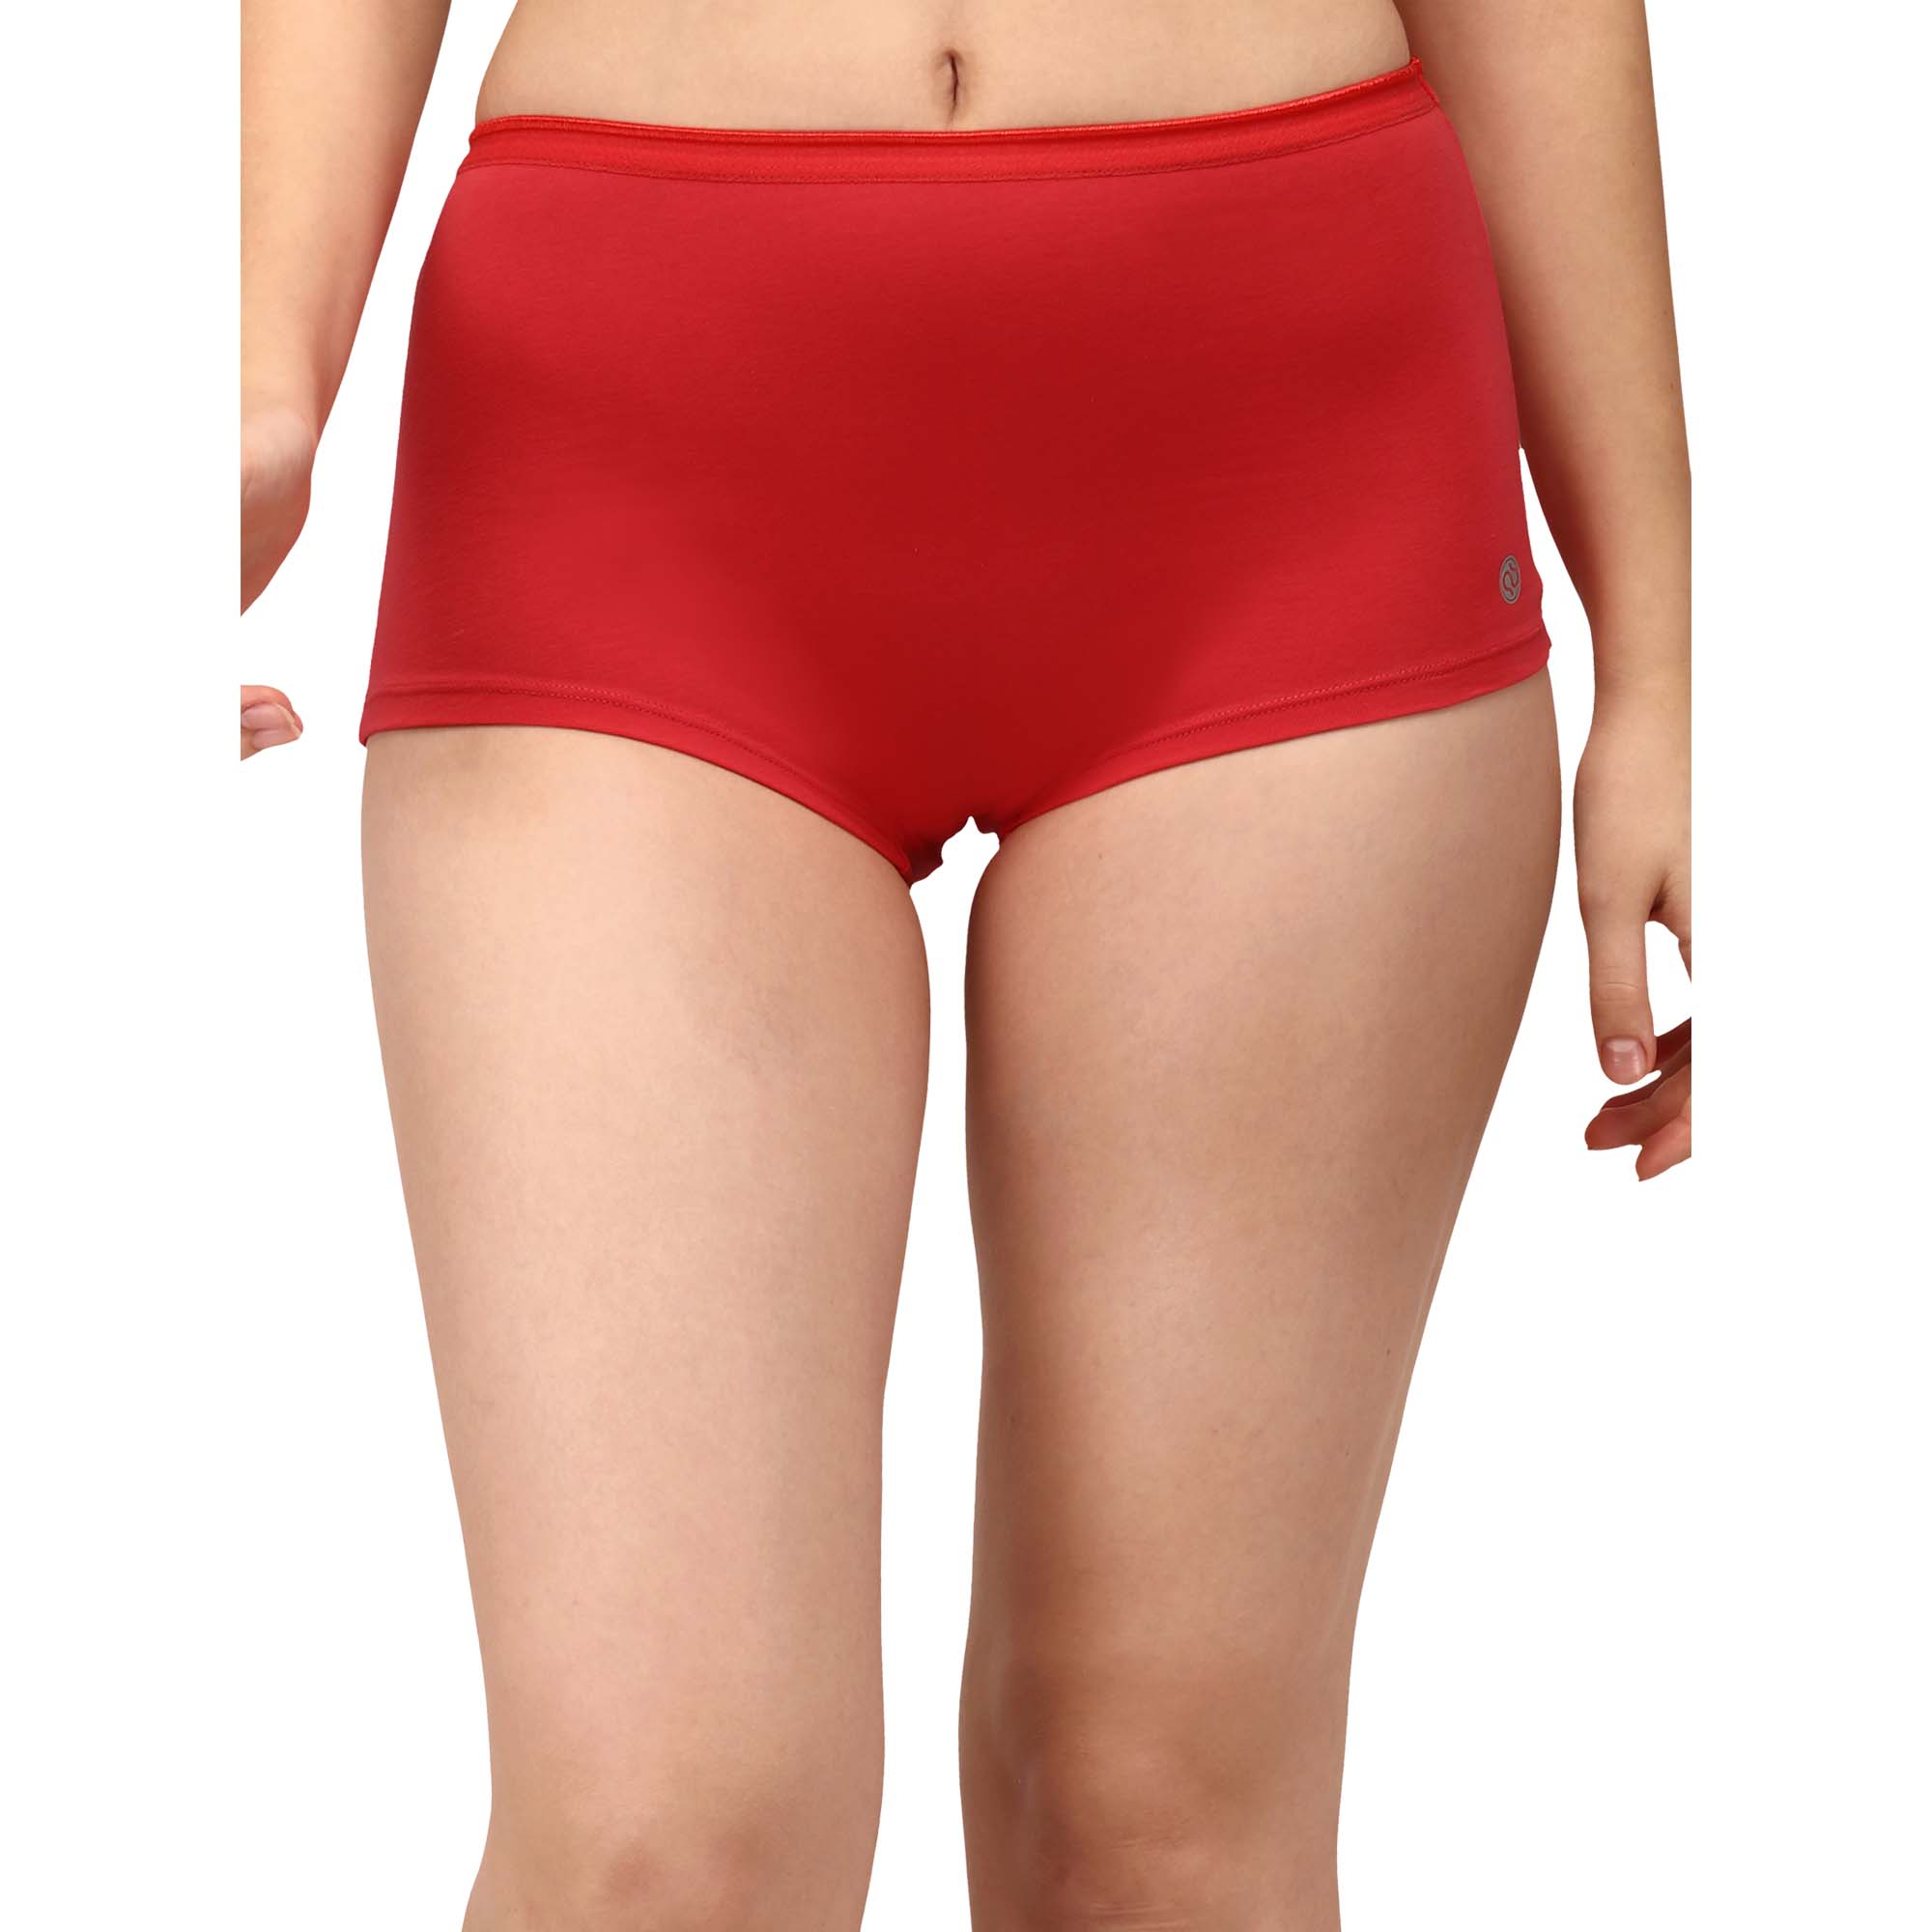 High Rise Full Coverage Cotton Spandex Boyshorts (Pack of 2) - 2BS-25